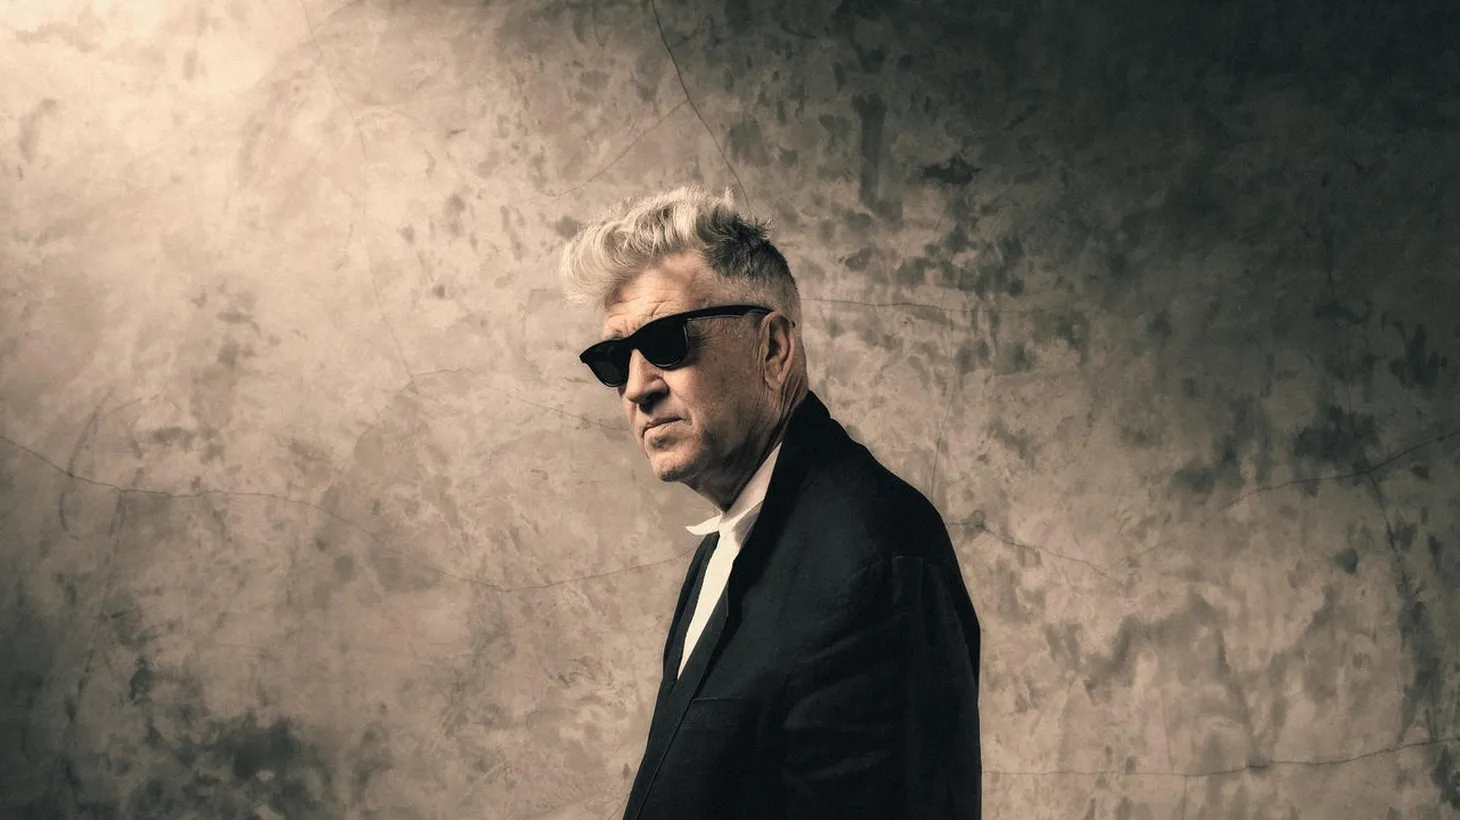 Tune in today to celebrate the sounds and spirit of MBE’s own weather report forecaster , the inimitable David Lynch. You'll also hear a lovely acoustic Brittany Howard cover from Houston based SOLACE.